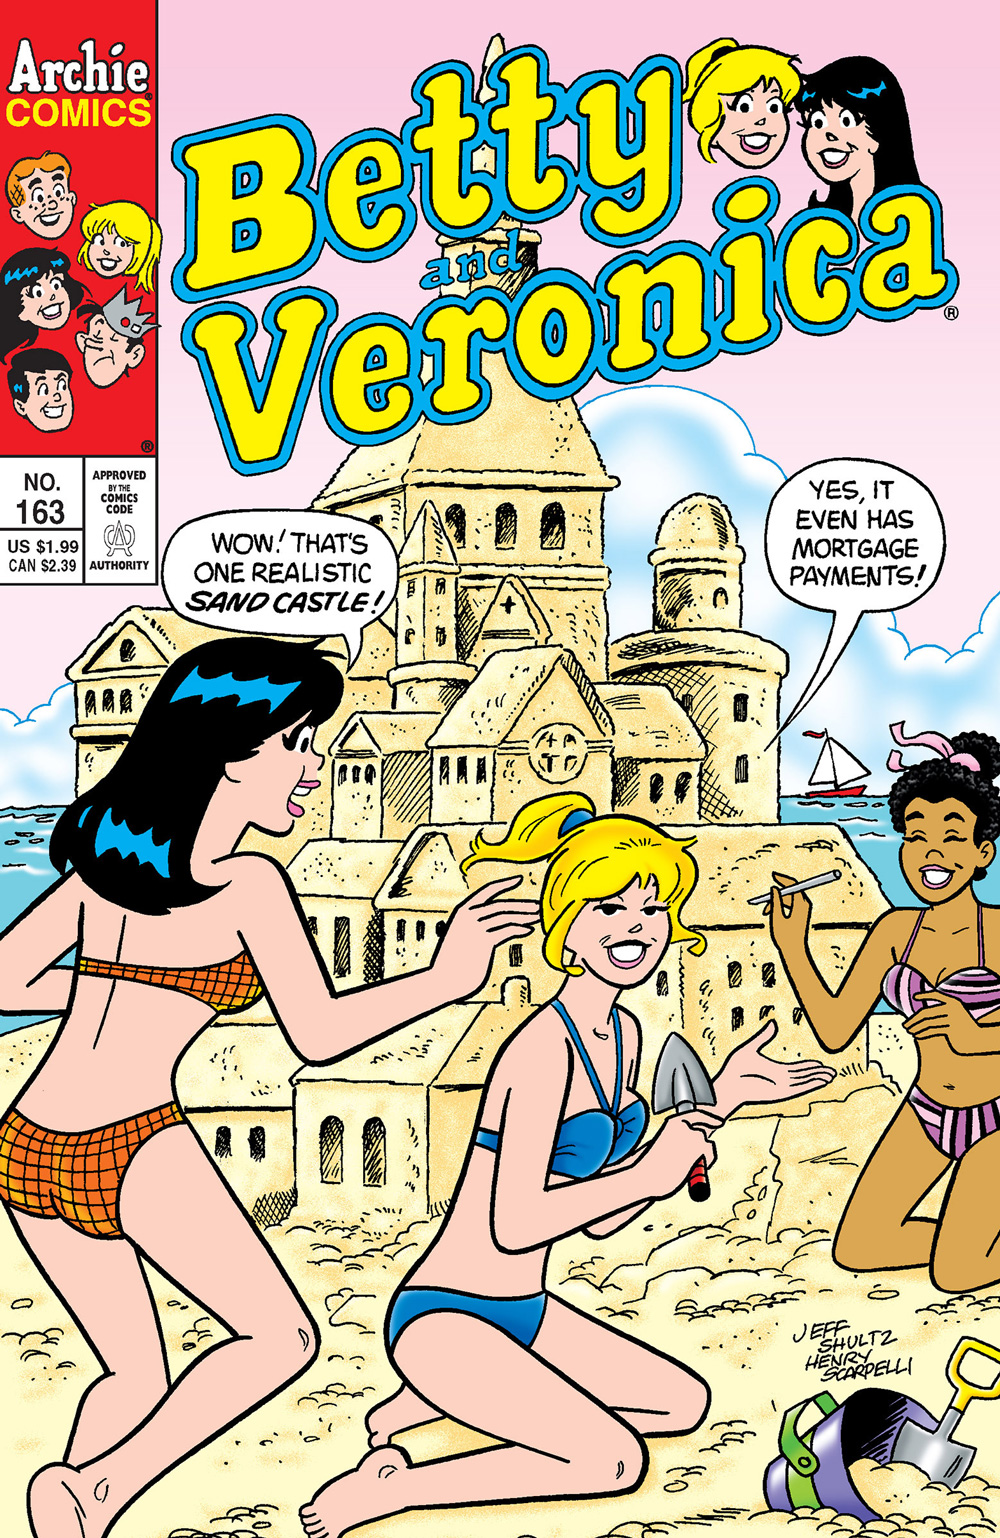 Betty, Veronica, and Nancy build a huge sandcastle on the beach. Veronica says it's realistic and Betty says it even has mortgage payments.